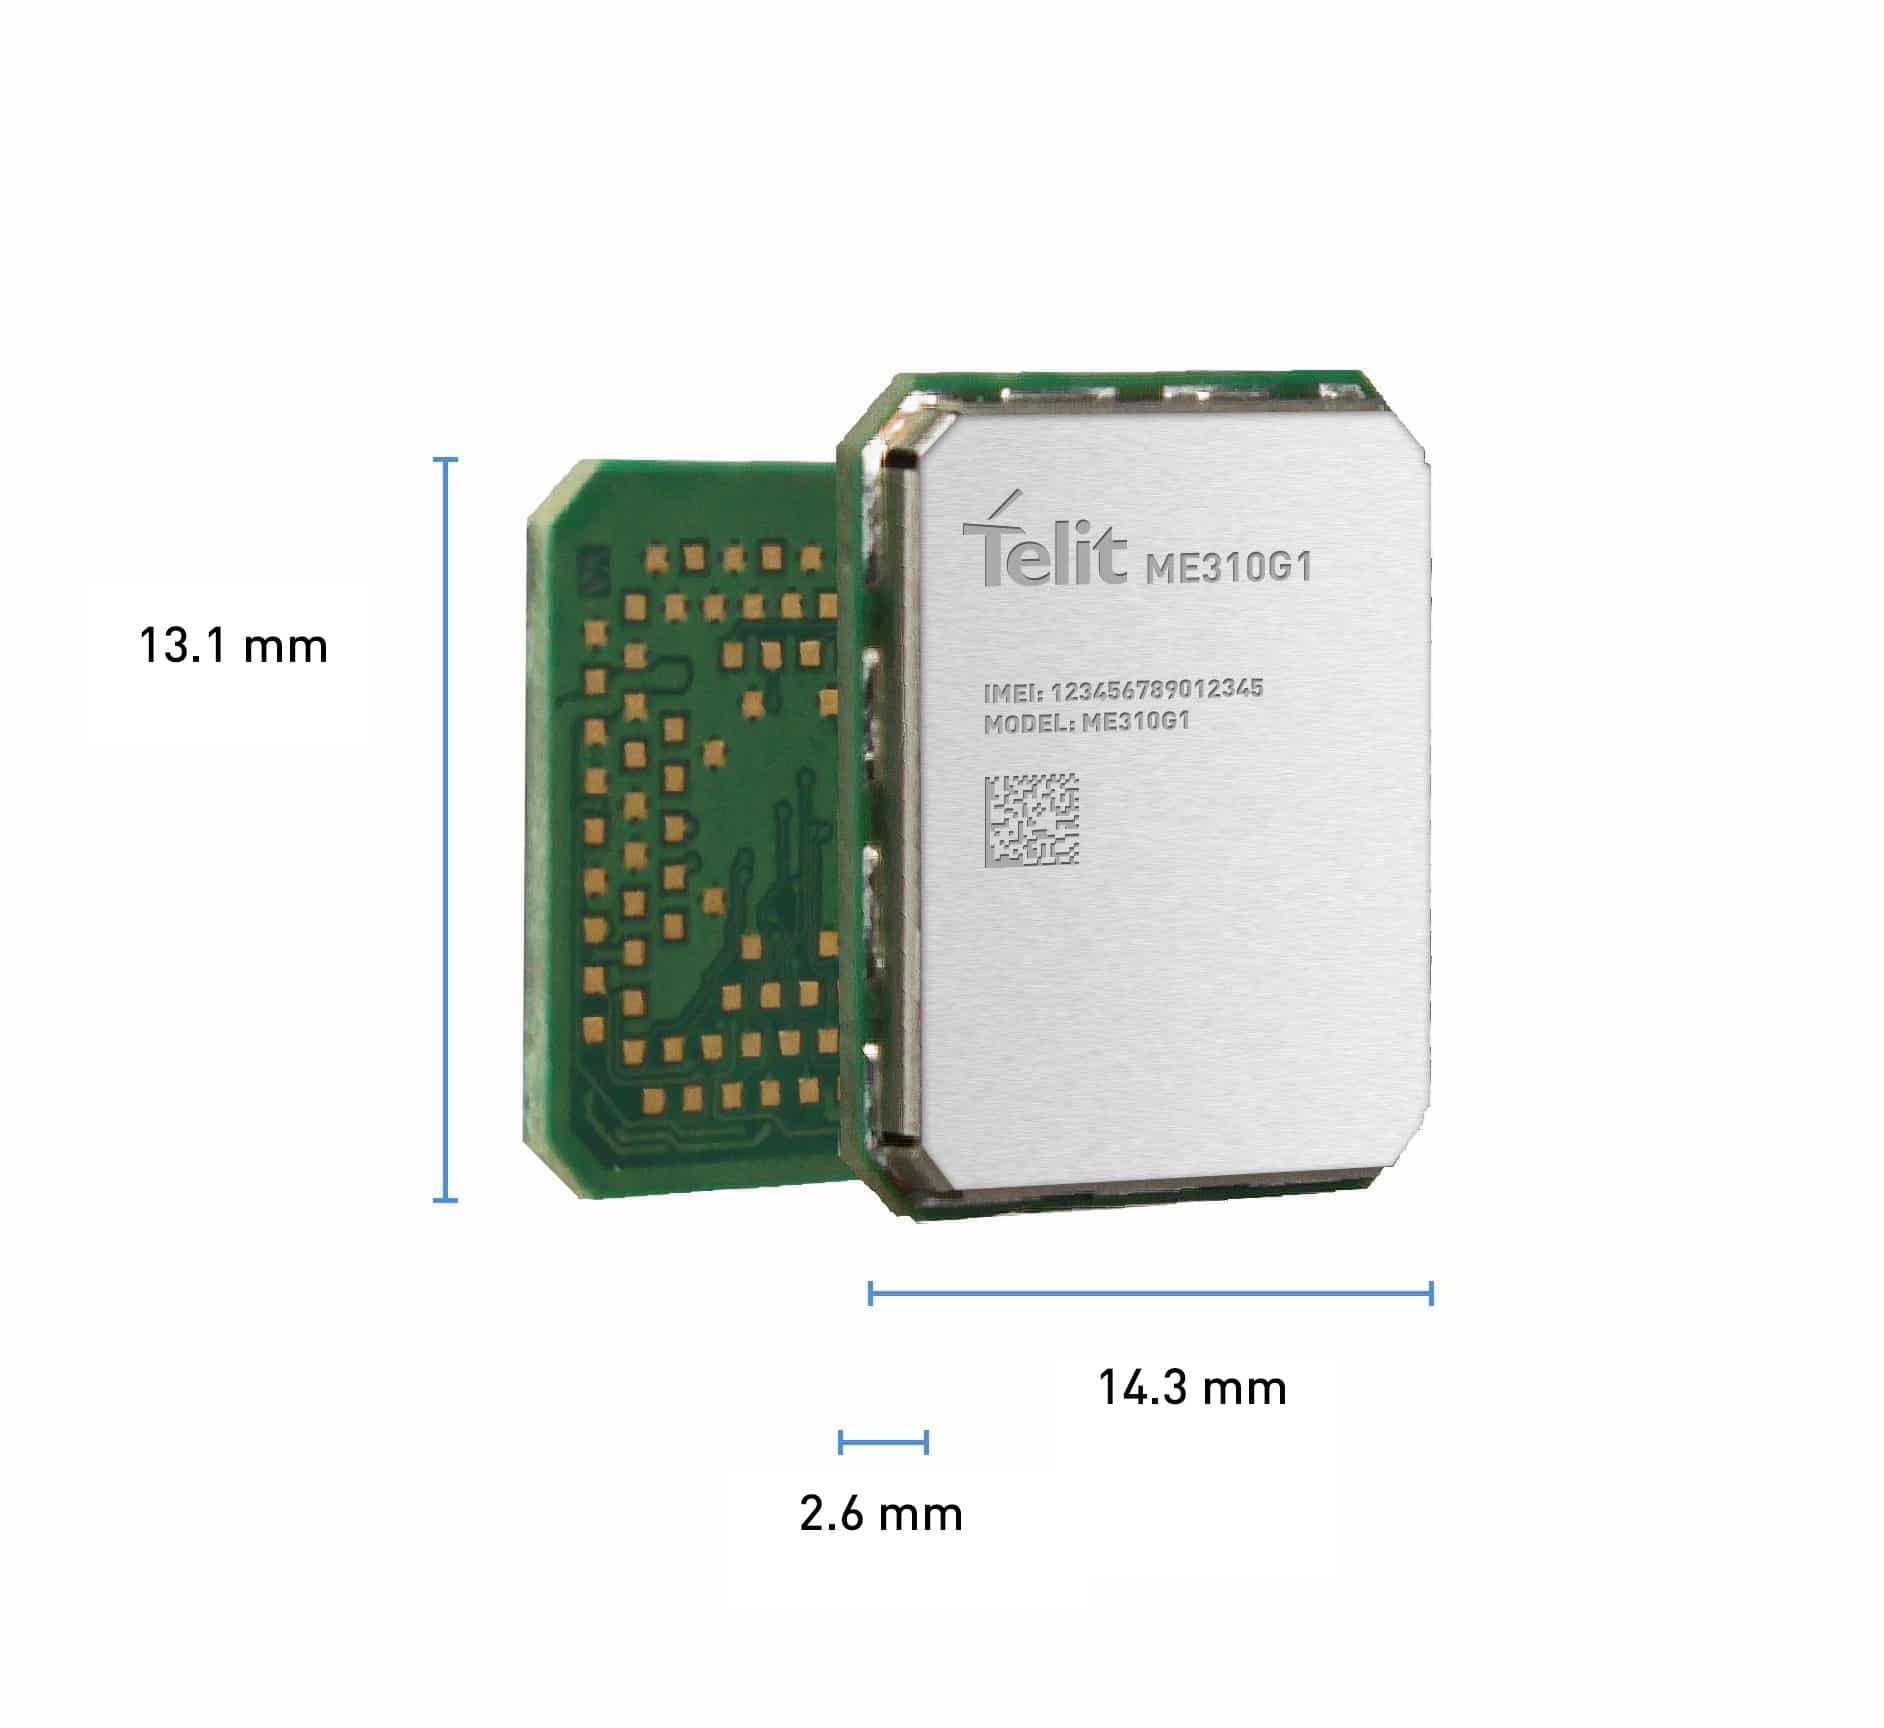 Telit ME310G1 ultra-small LTE-M and NB-IoT cellular LPWA module, a member of the xE310 form factor family.